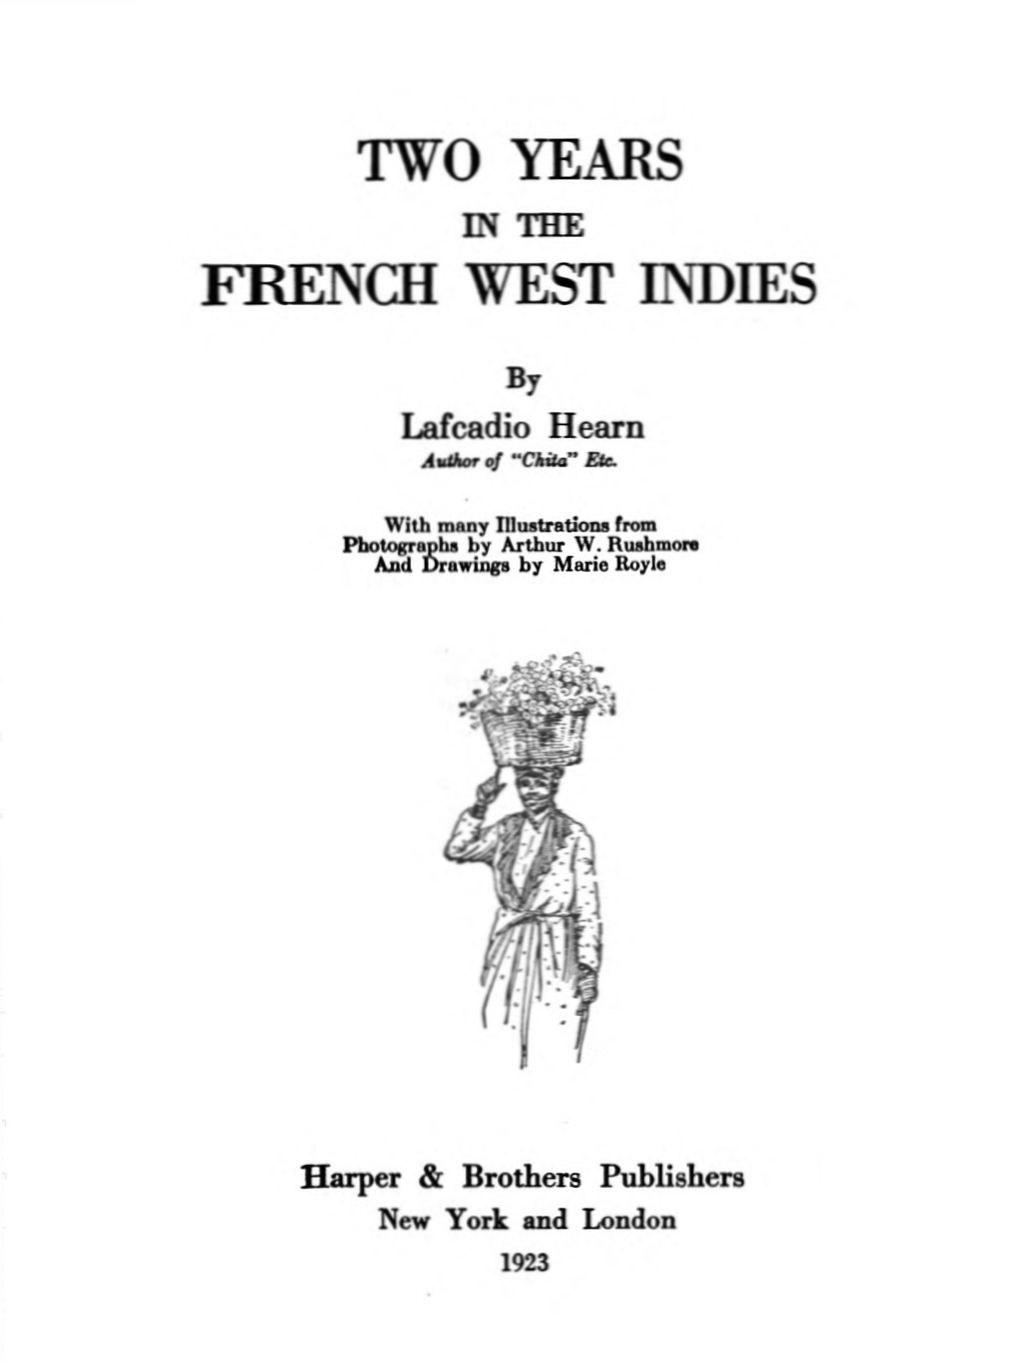 The Project Gutenberg eBook of Two Years in the French West Indies, by Lafcadio Hearn.